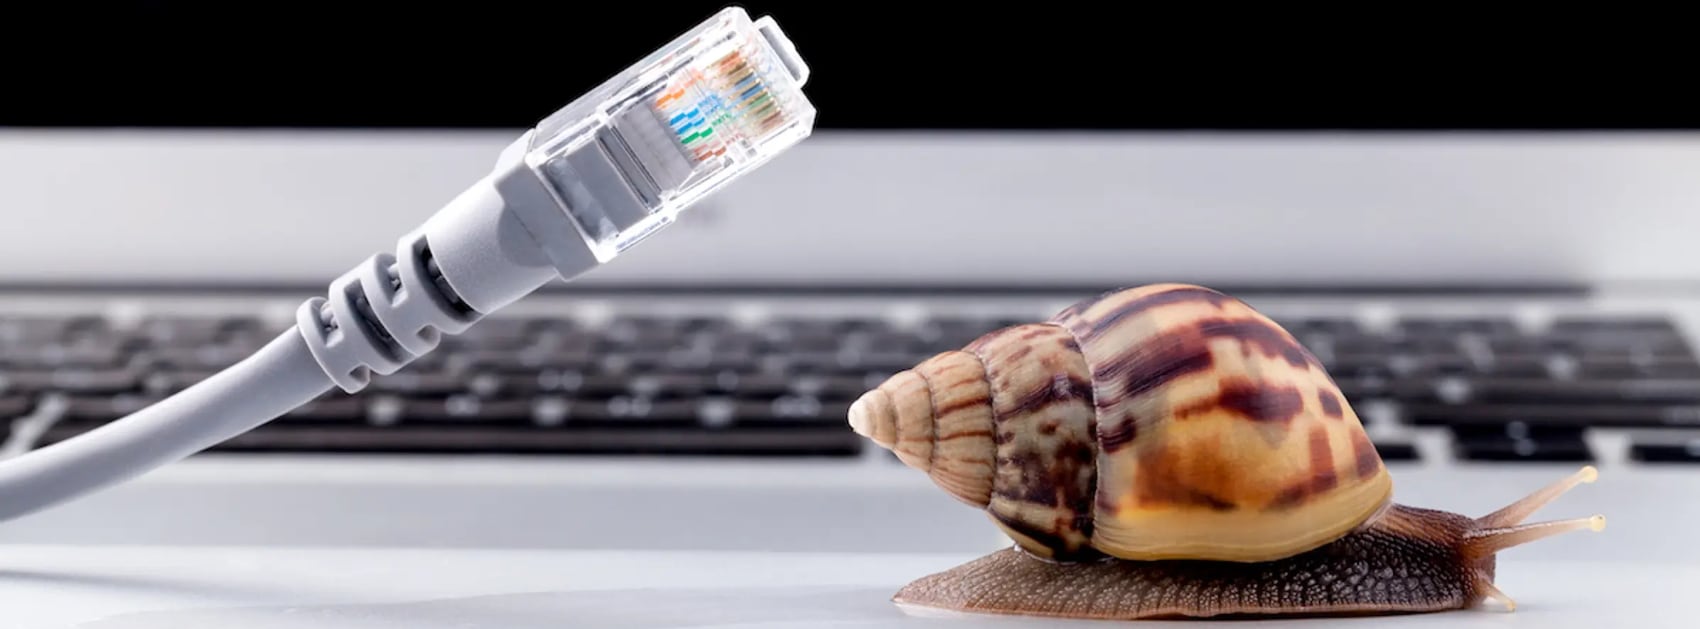 An ethernet cable next to a snail